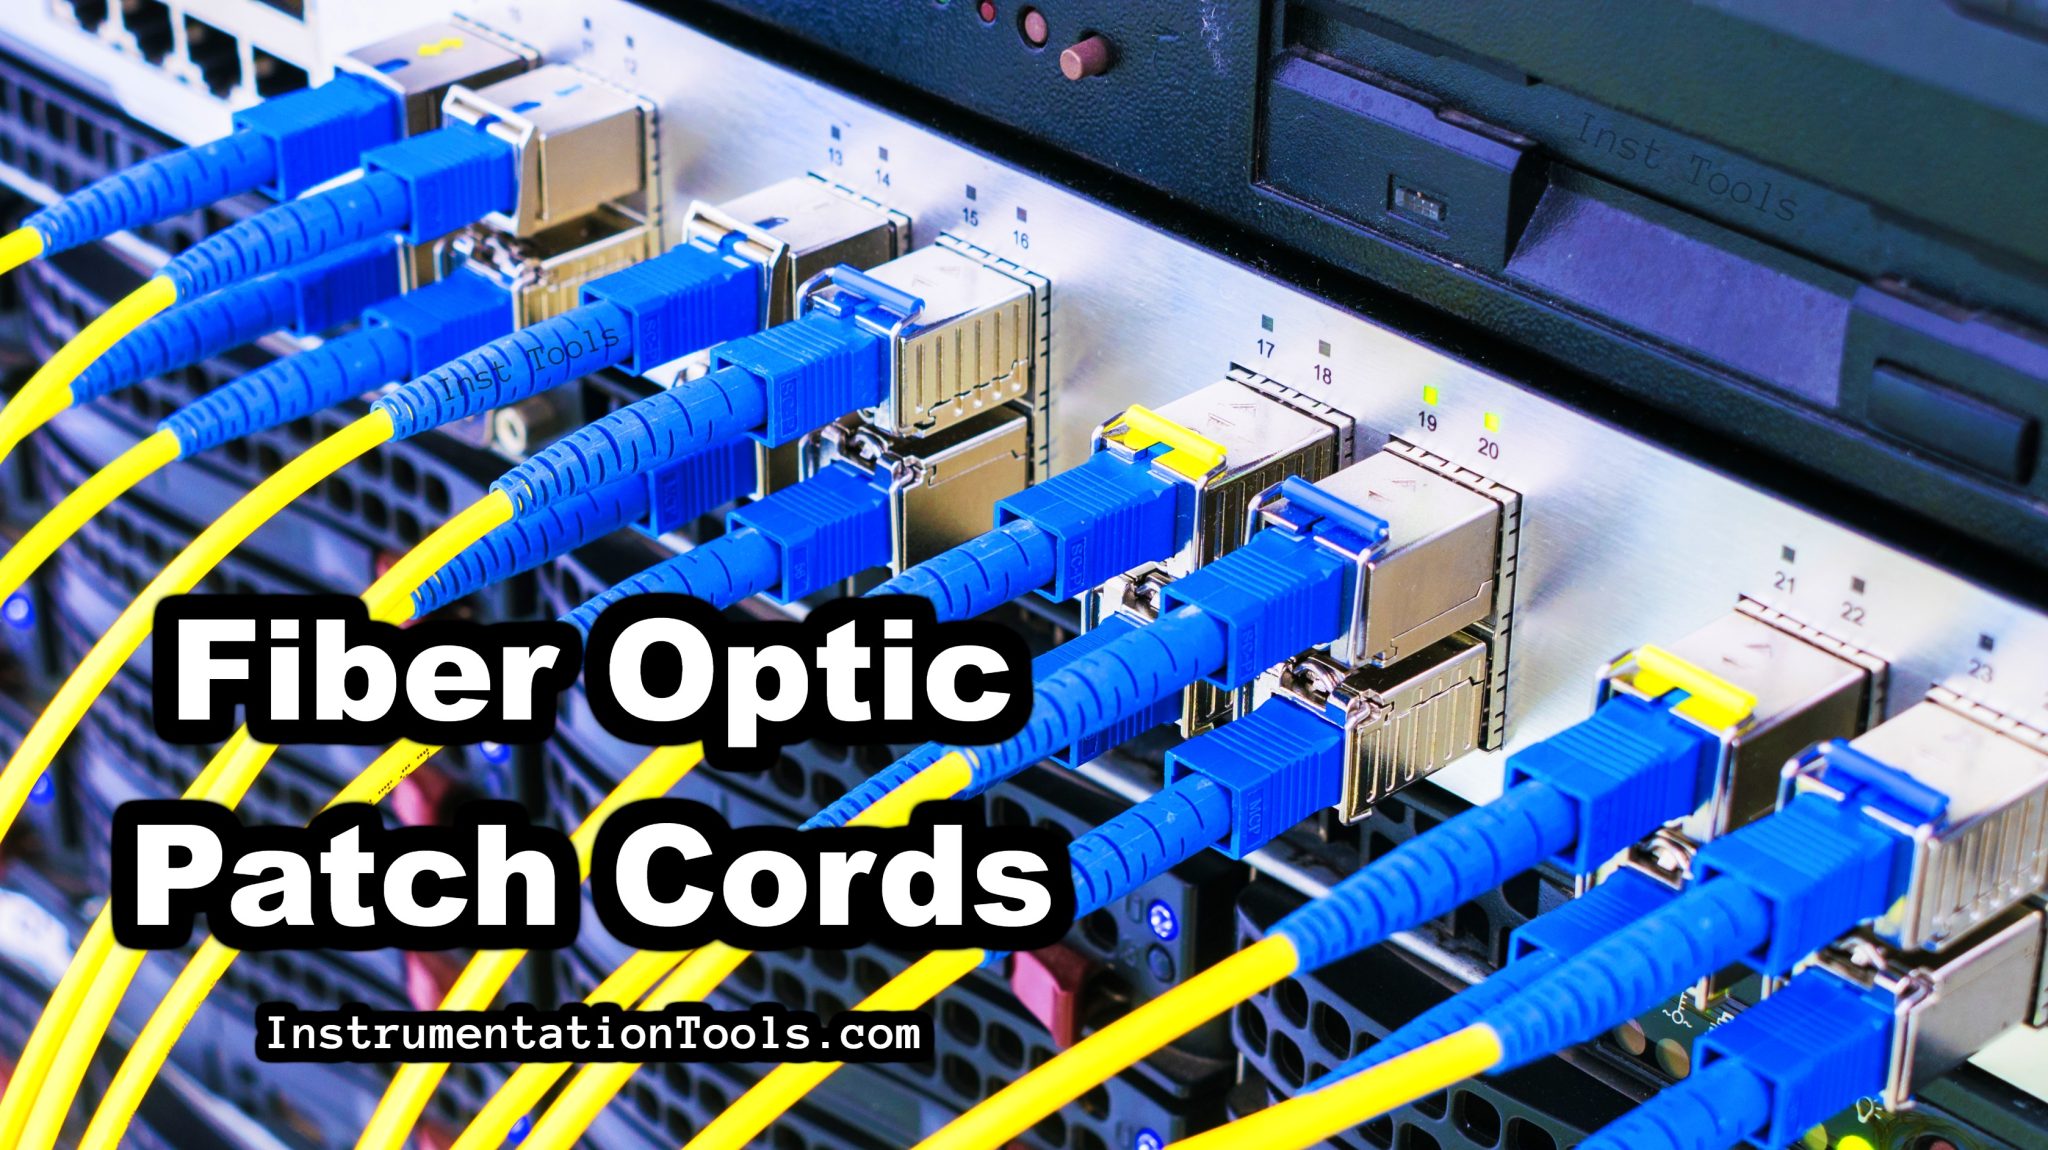 What is a Fiber Optic Patch Cord? - Types, Explained